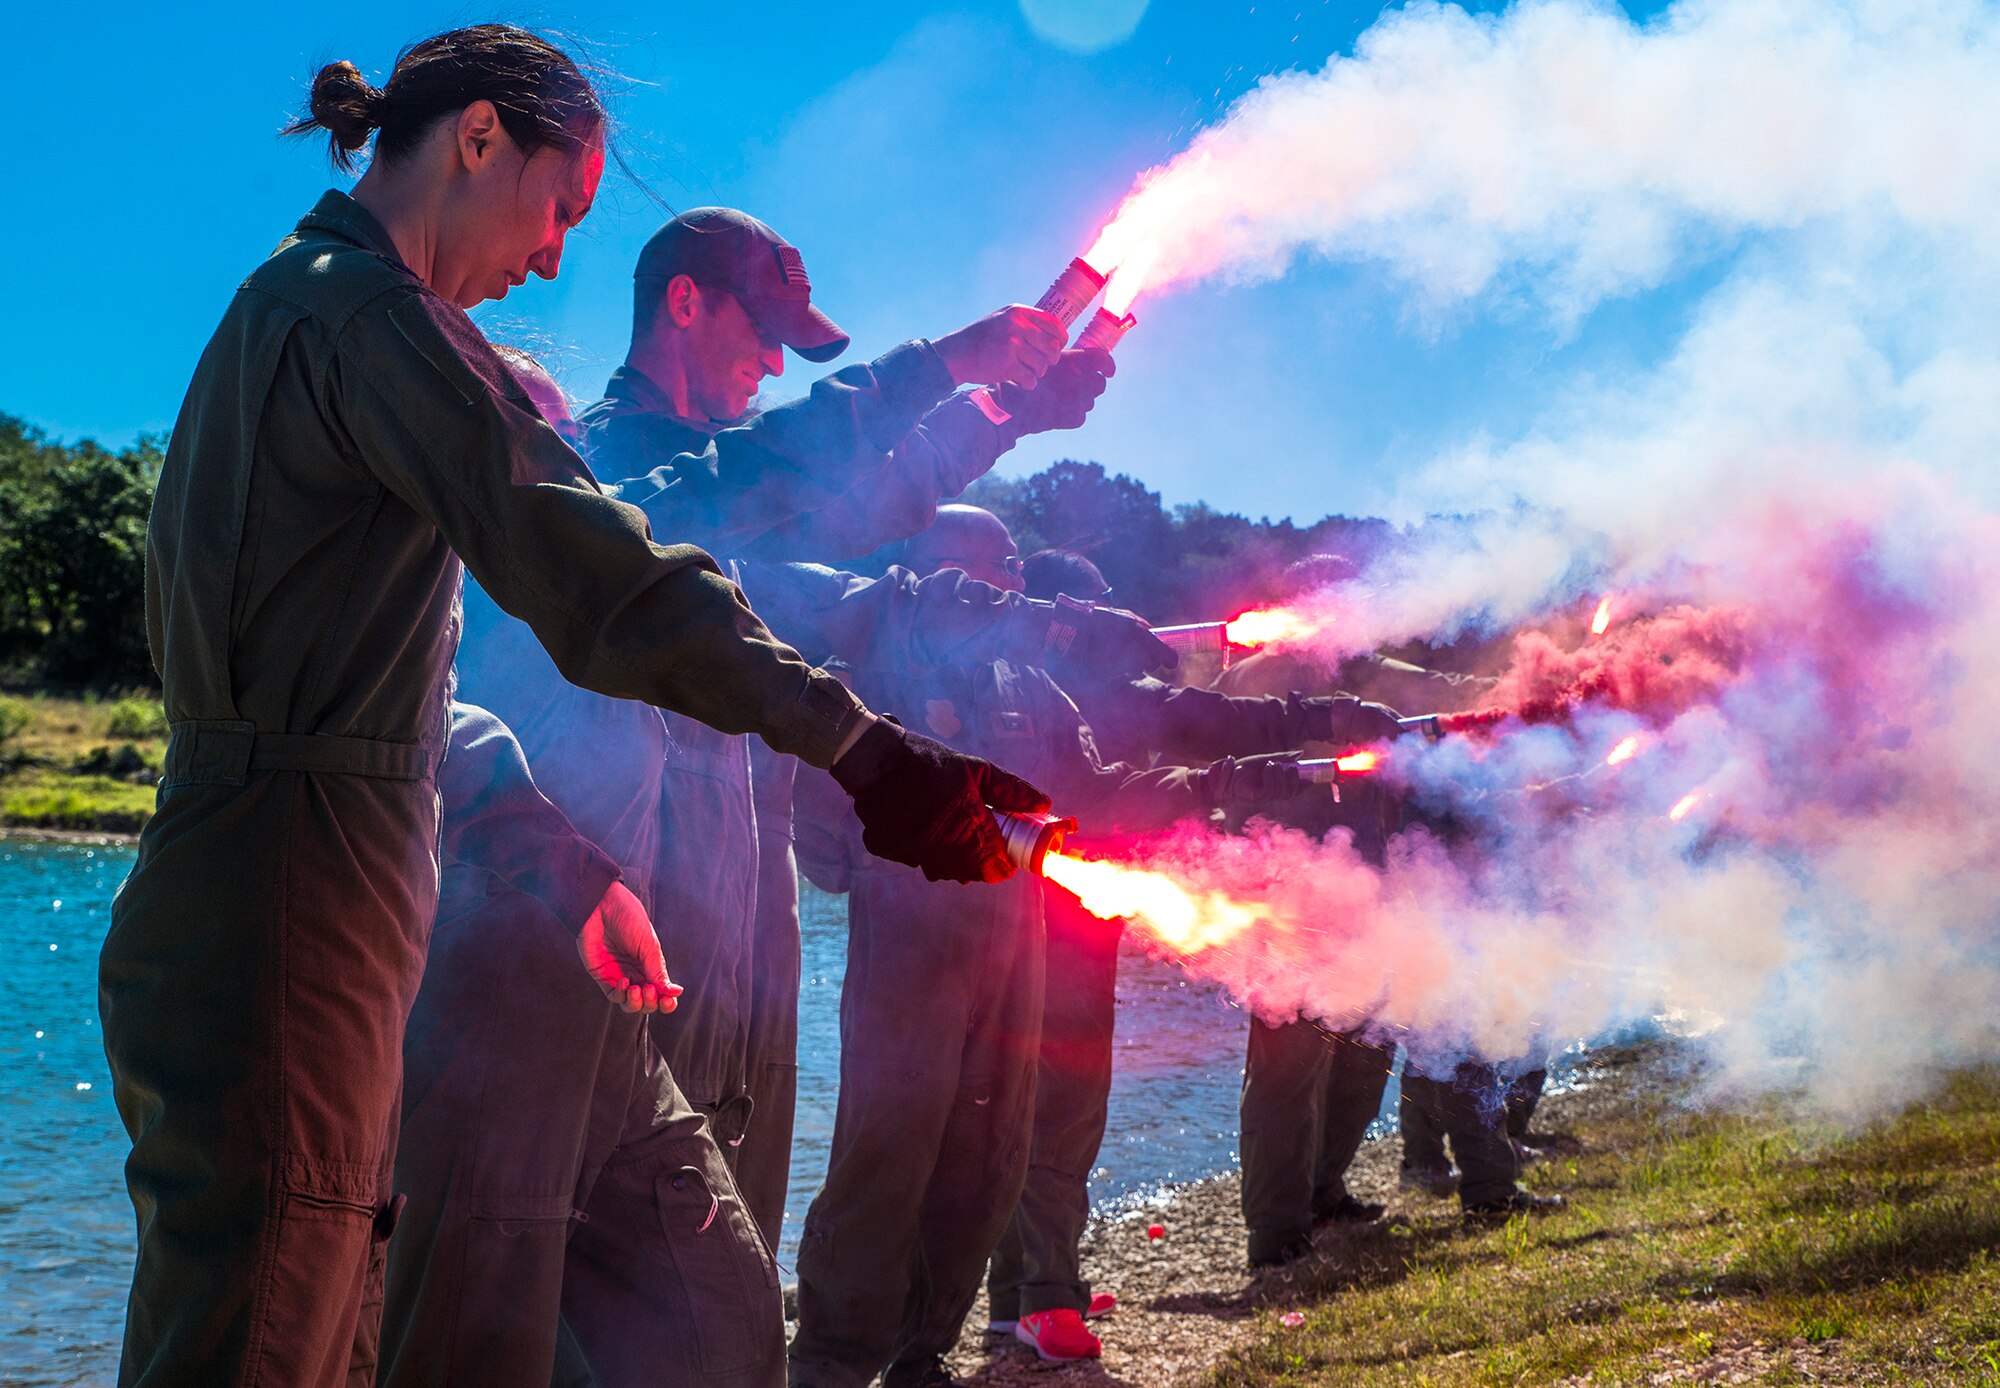 Capt. Charlie South, 433rd Aeromedical Evacuation Squadron flight nurse, deploys an MK-124 flare during water survival training May 5, 2017 at Joint Base San Antonio-Canyon Lake. The triannual training is a requirement for all aircrew Air Force Specialty Codes and includes open water swimming and life raft training. (U.S. Air Force photo by Benjamin Faske)